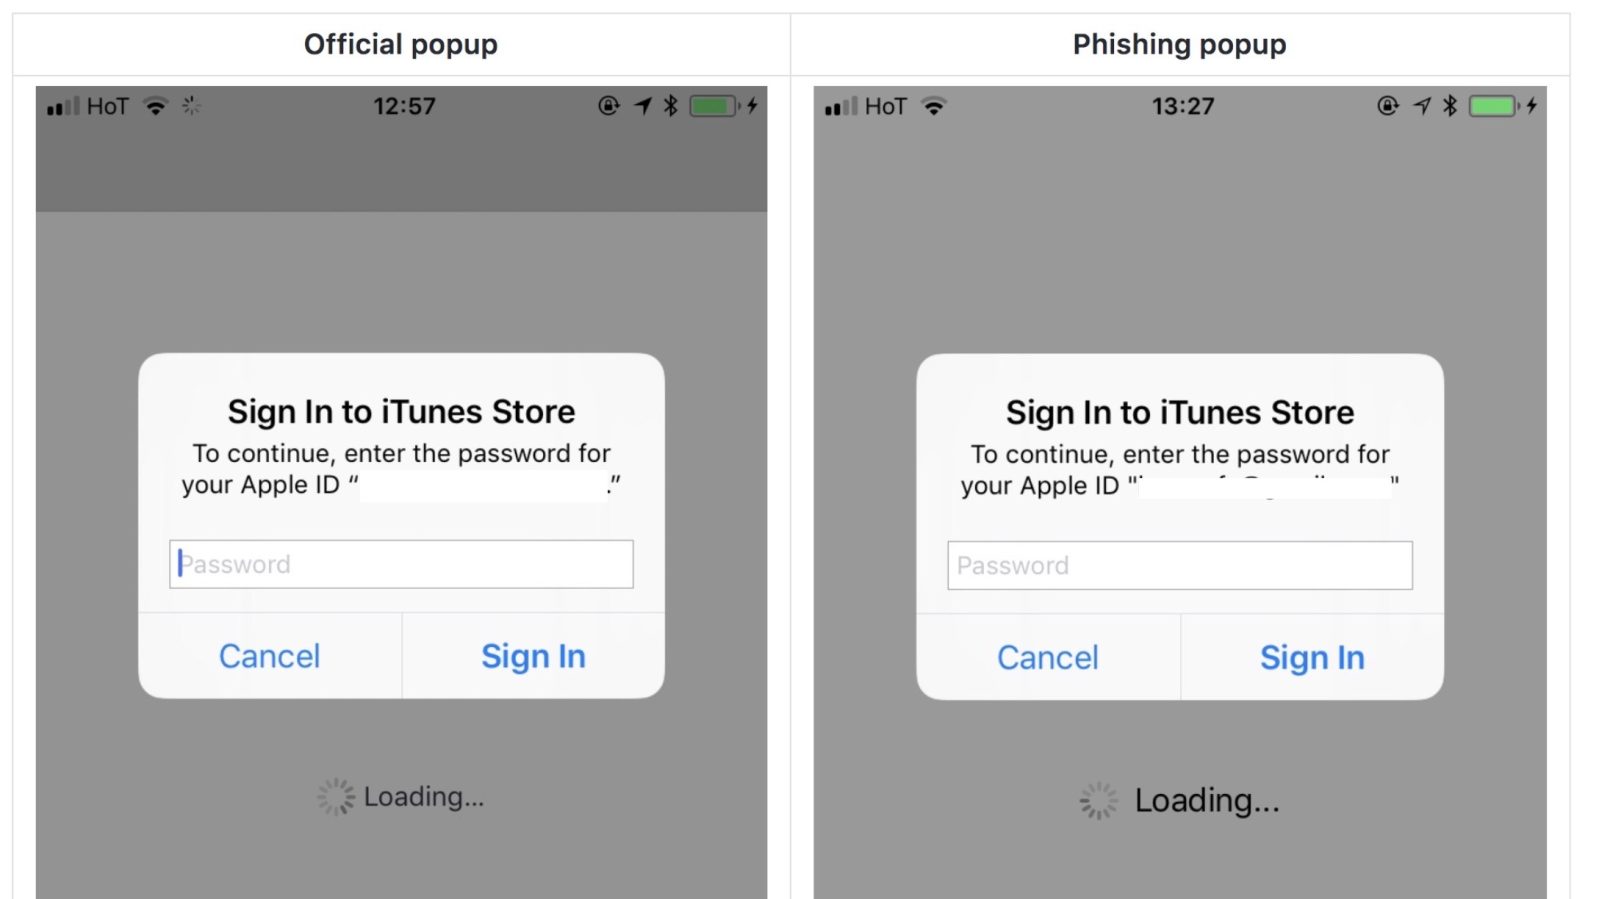 Psa A New Phishing Attack Could Trick You Into Giving Away Your Apple Id Password 9to5mac